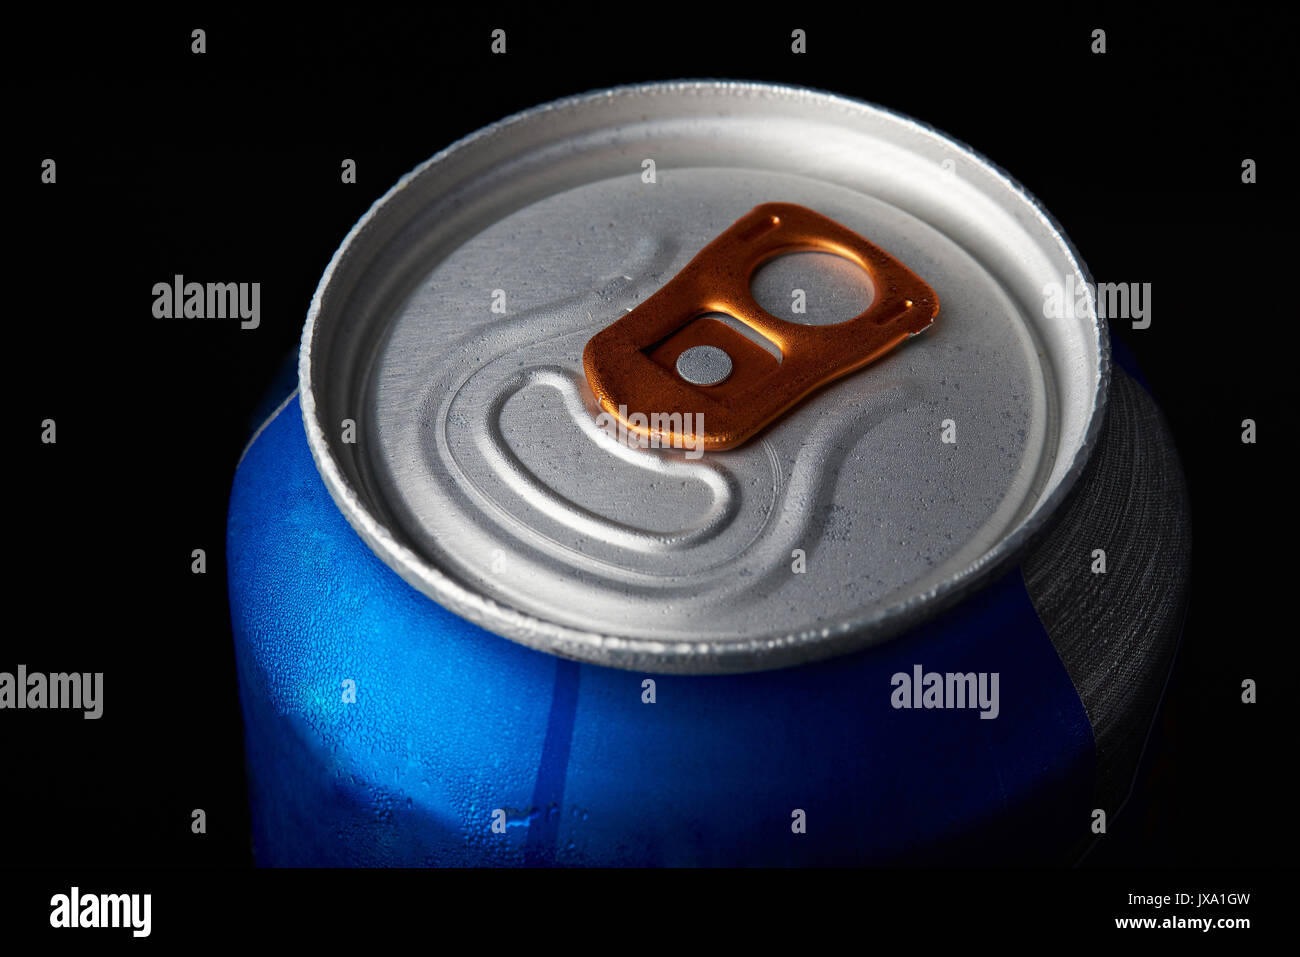 Metal beer can close-up isolated on black background Stock Photo